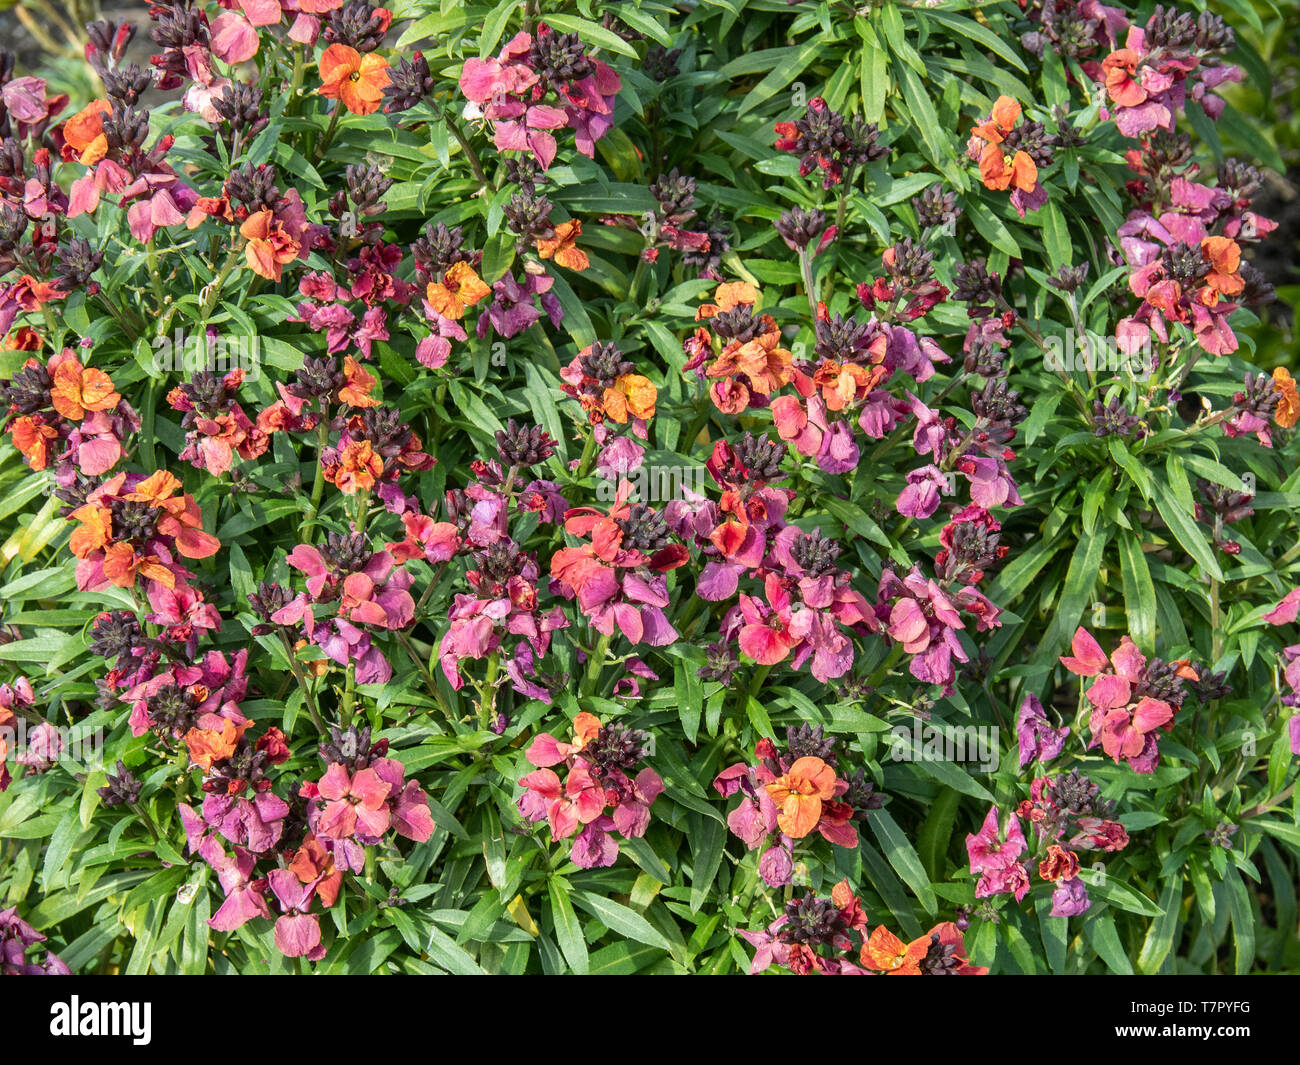 A clump of Erysimum Winter orchid showing the brown and purple flowers over the green foliage Stock Photo